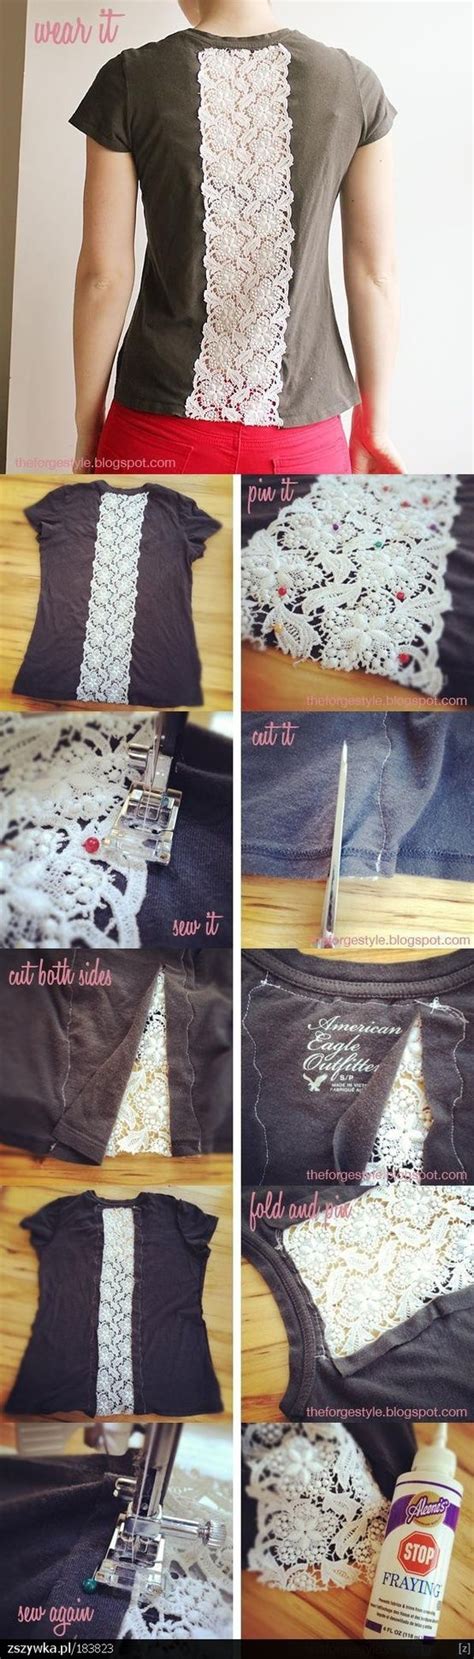 31 Useful And Most Popular Diy Ideas Diy Insert Vintage Lace In T